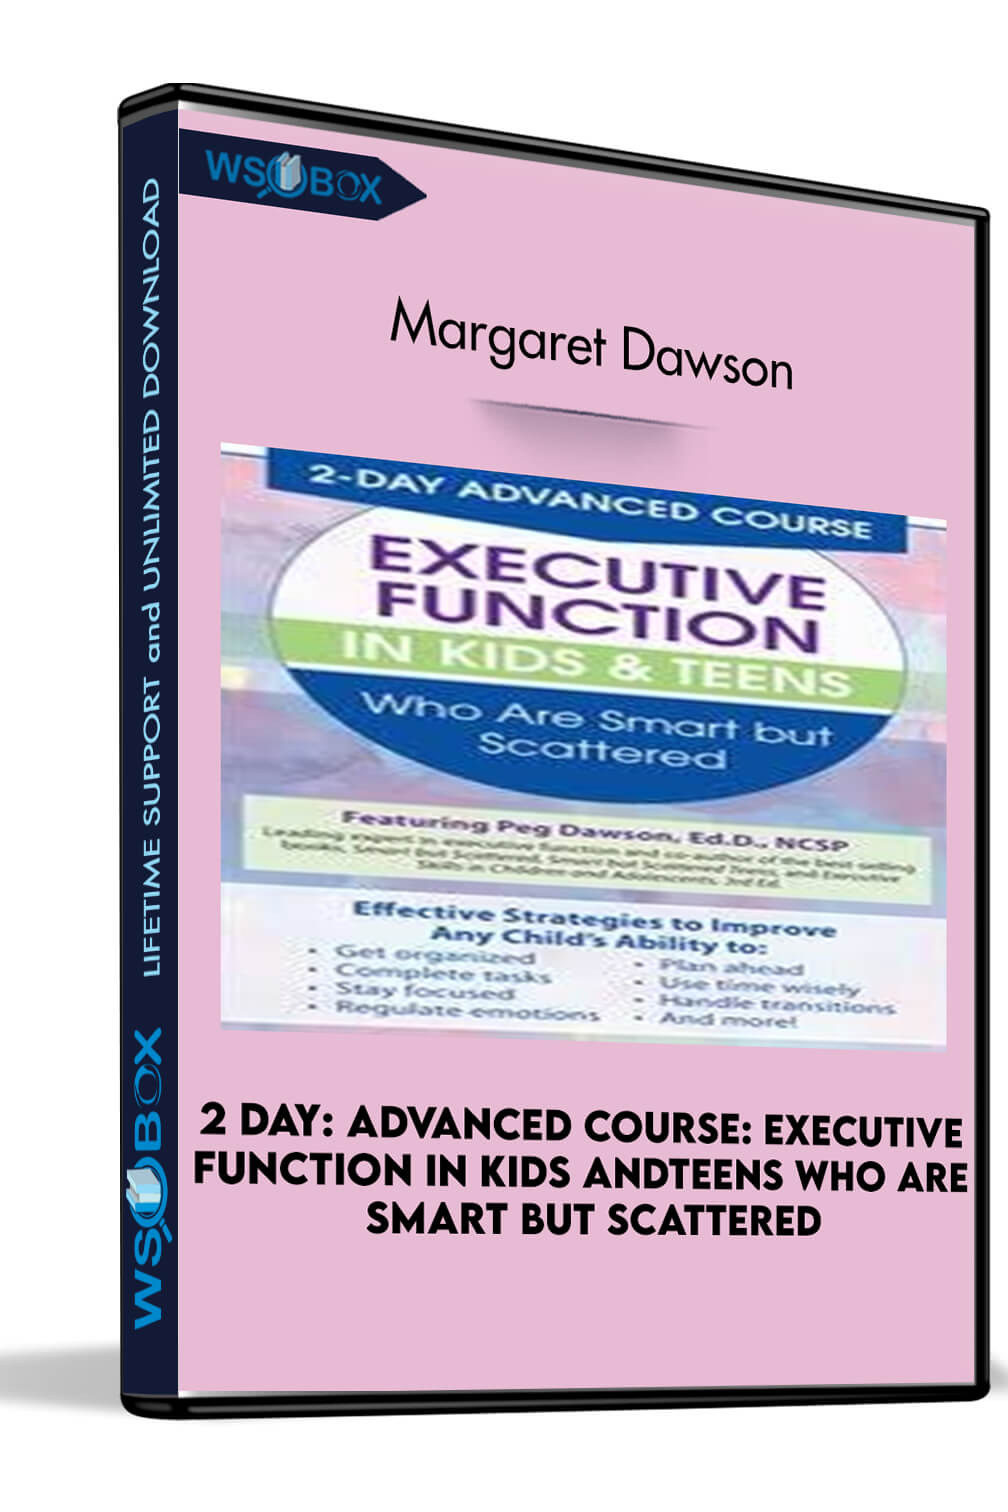 2 Day: Advanced Course: Executive Function in Kids andTeens Who Are Smart but Scattered – Margaret Dawson